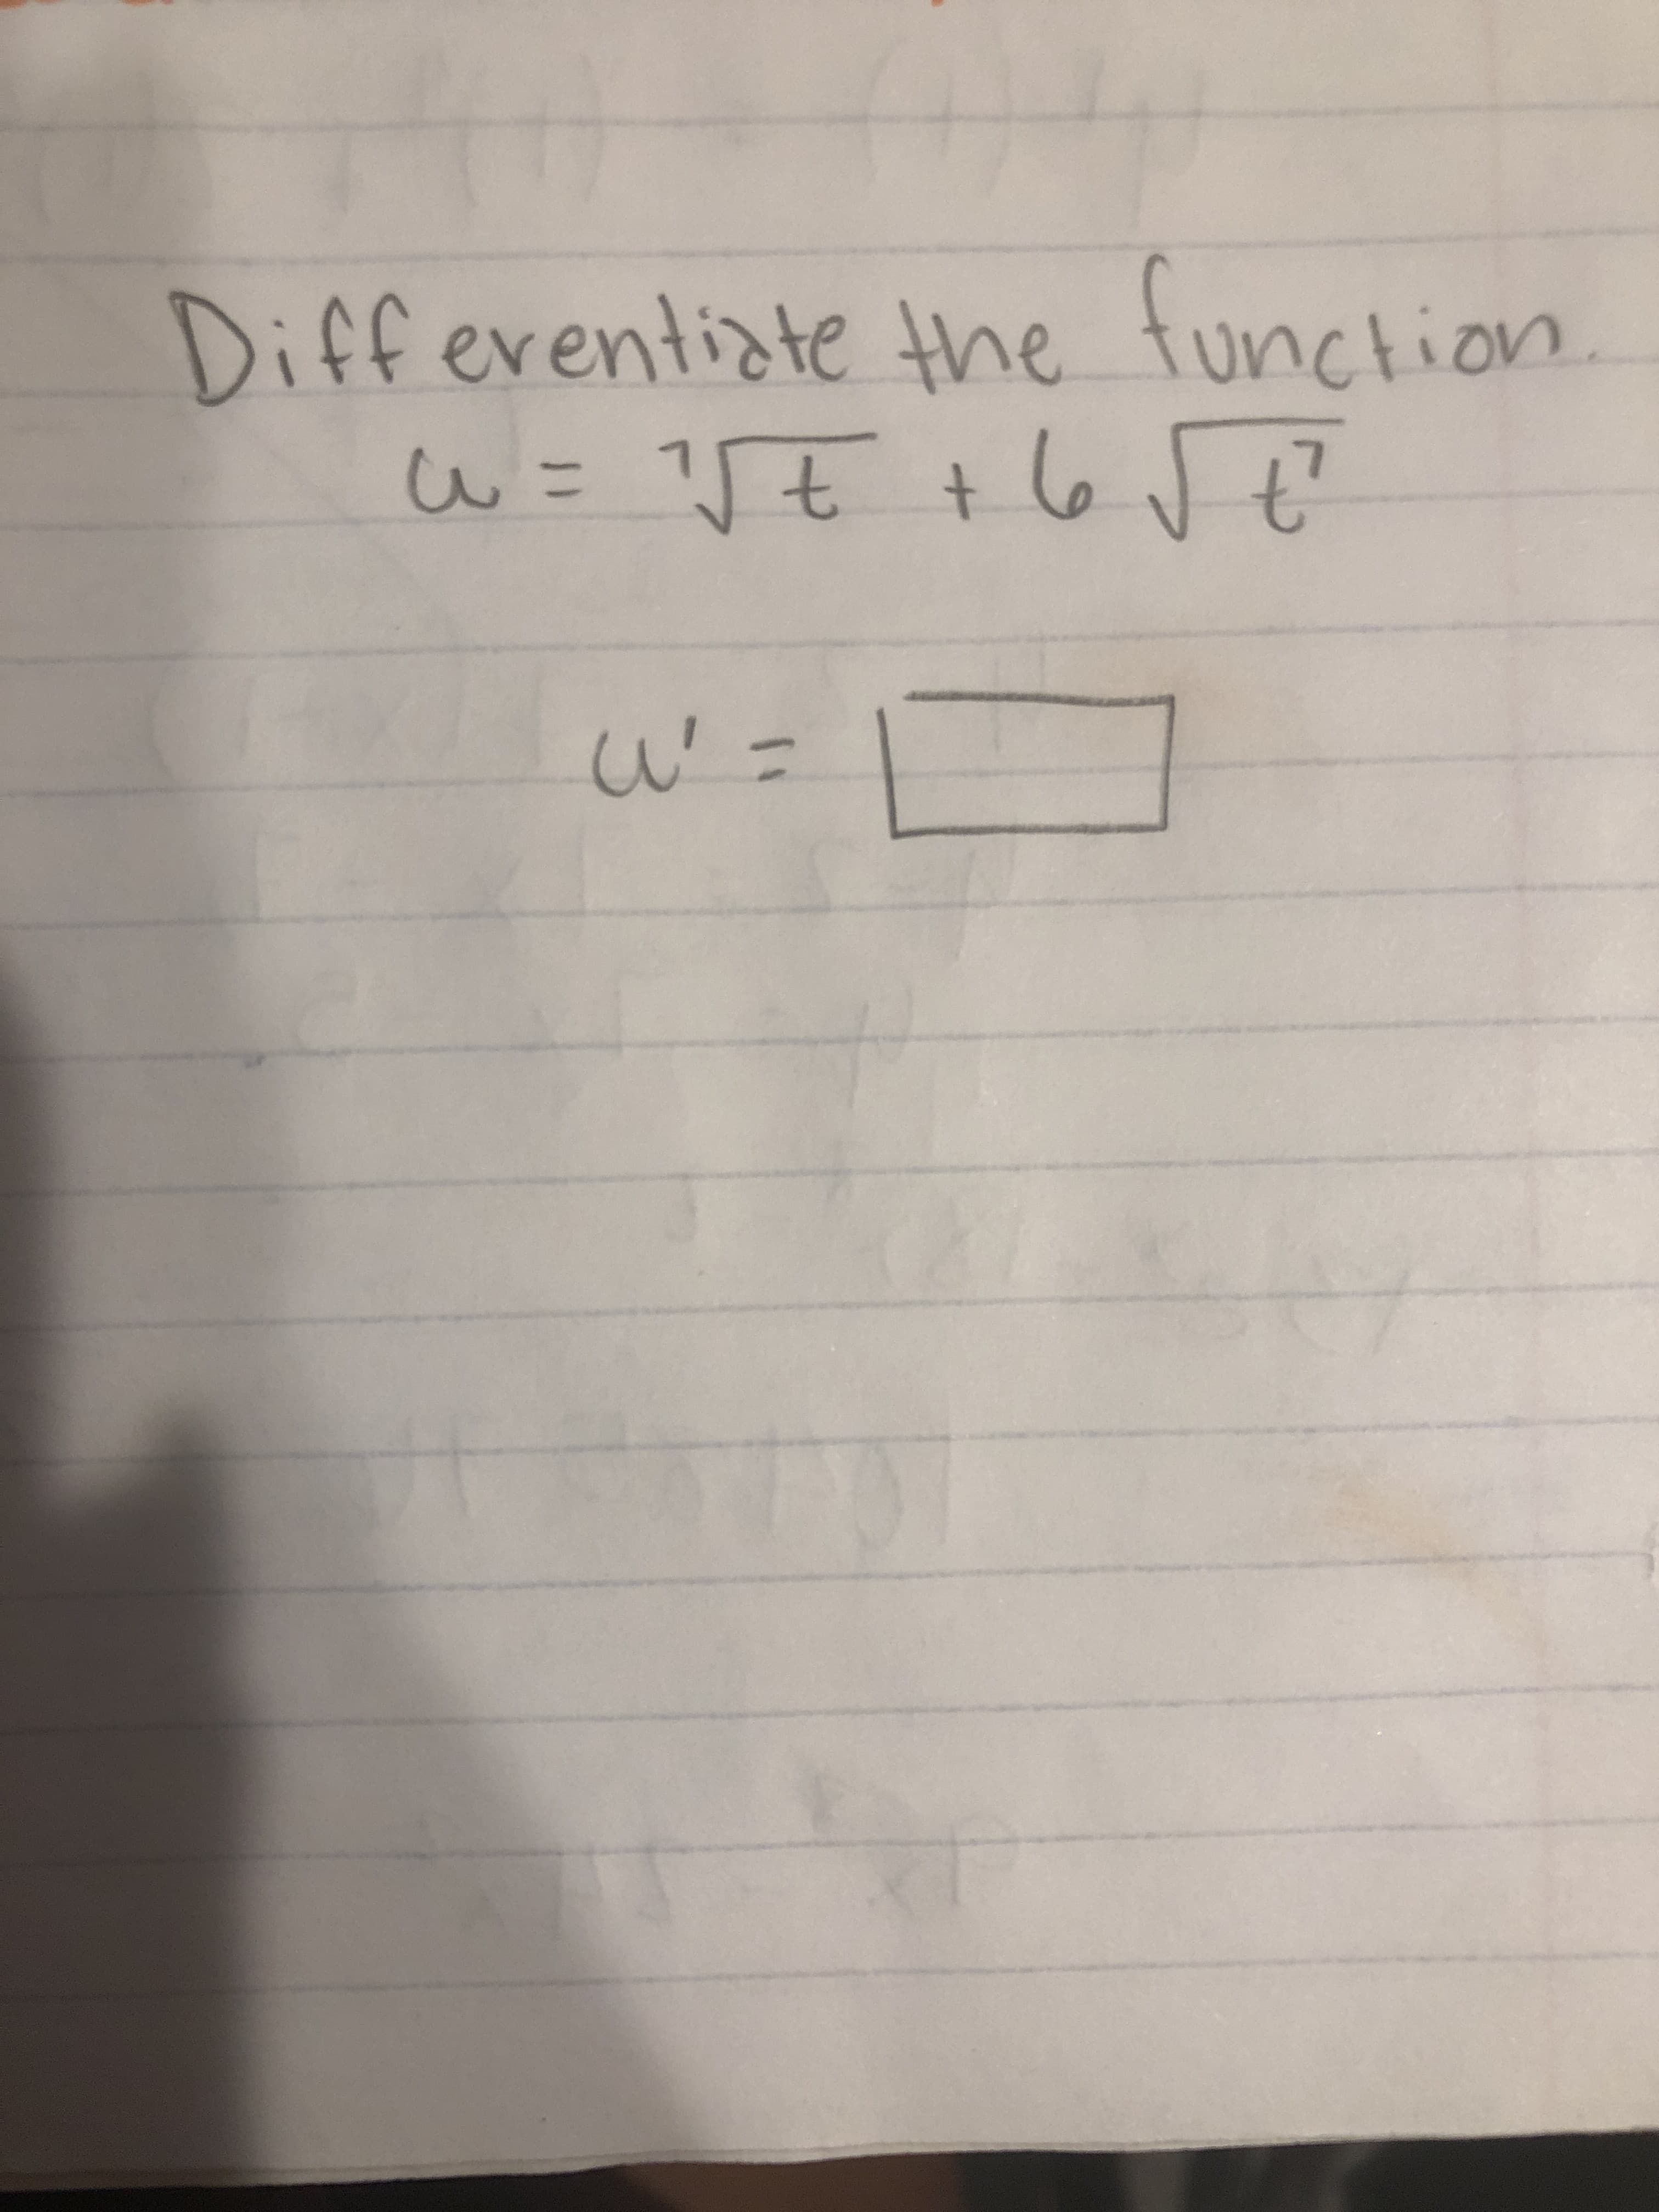 Differentiste he function
+ GE
t
